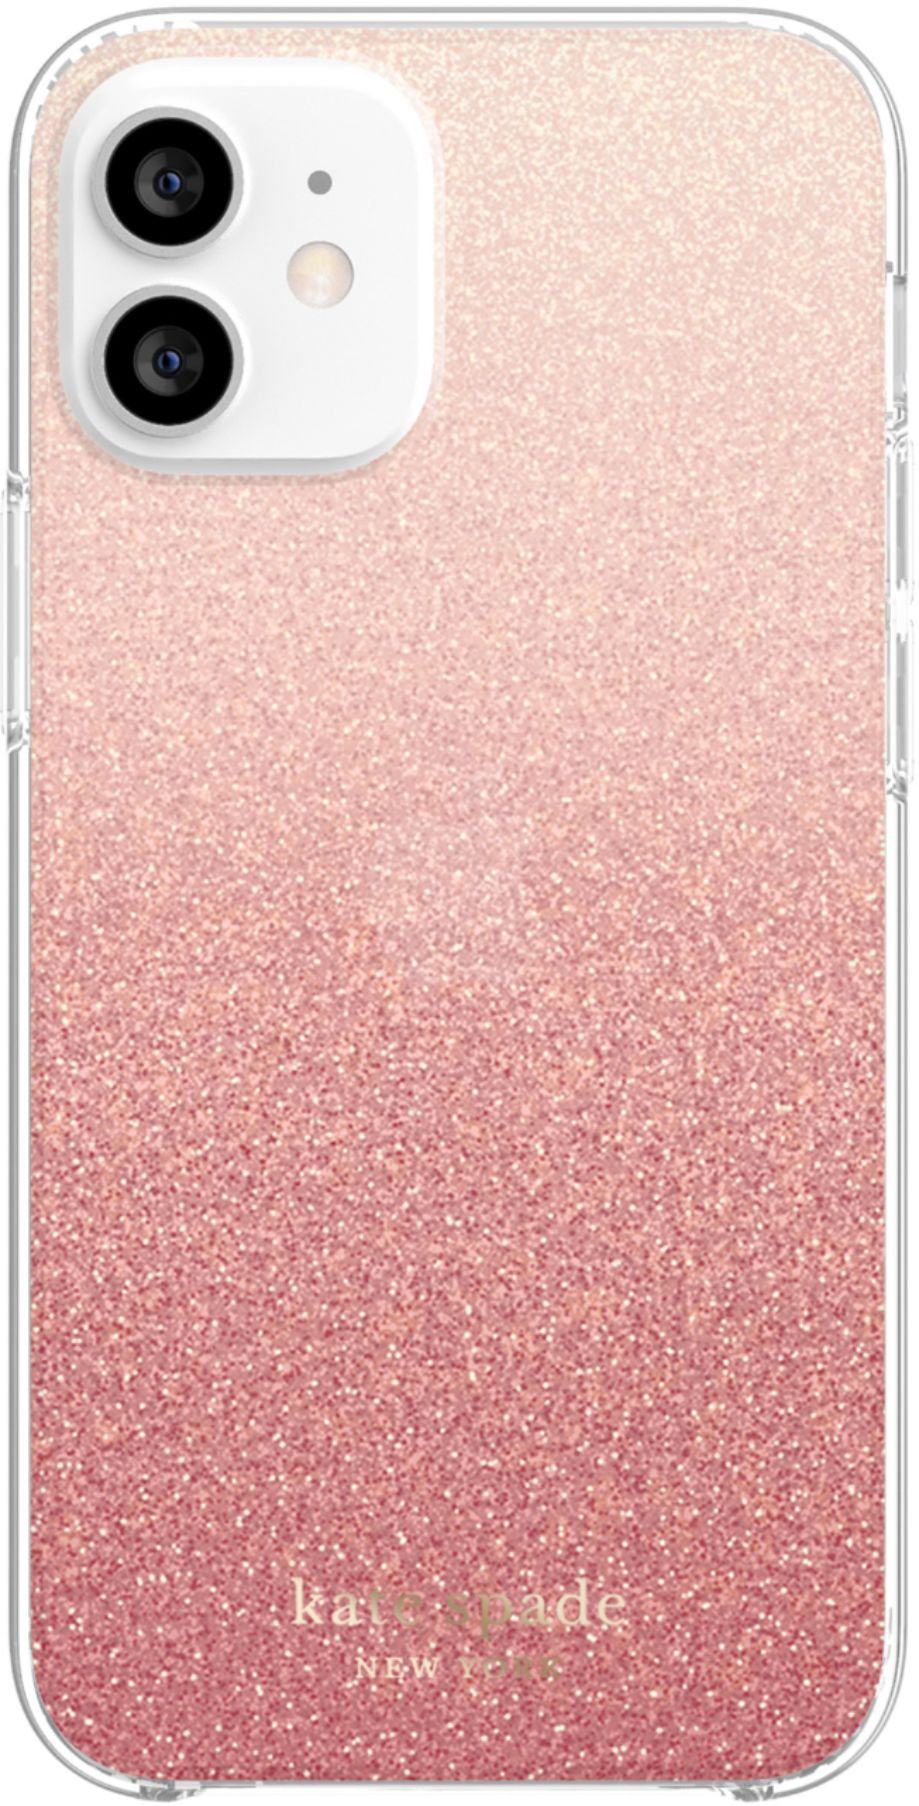 kate spade new york Protective Hard shell Case for iPhone 12 Mini Clear  KSIPH-151-GLOSN - Best Buy